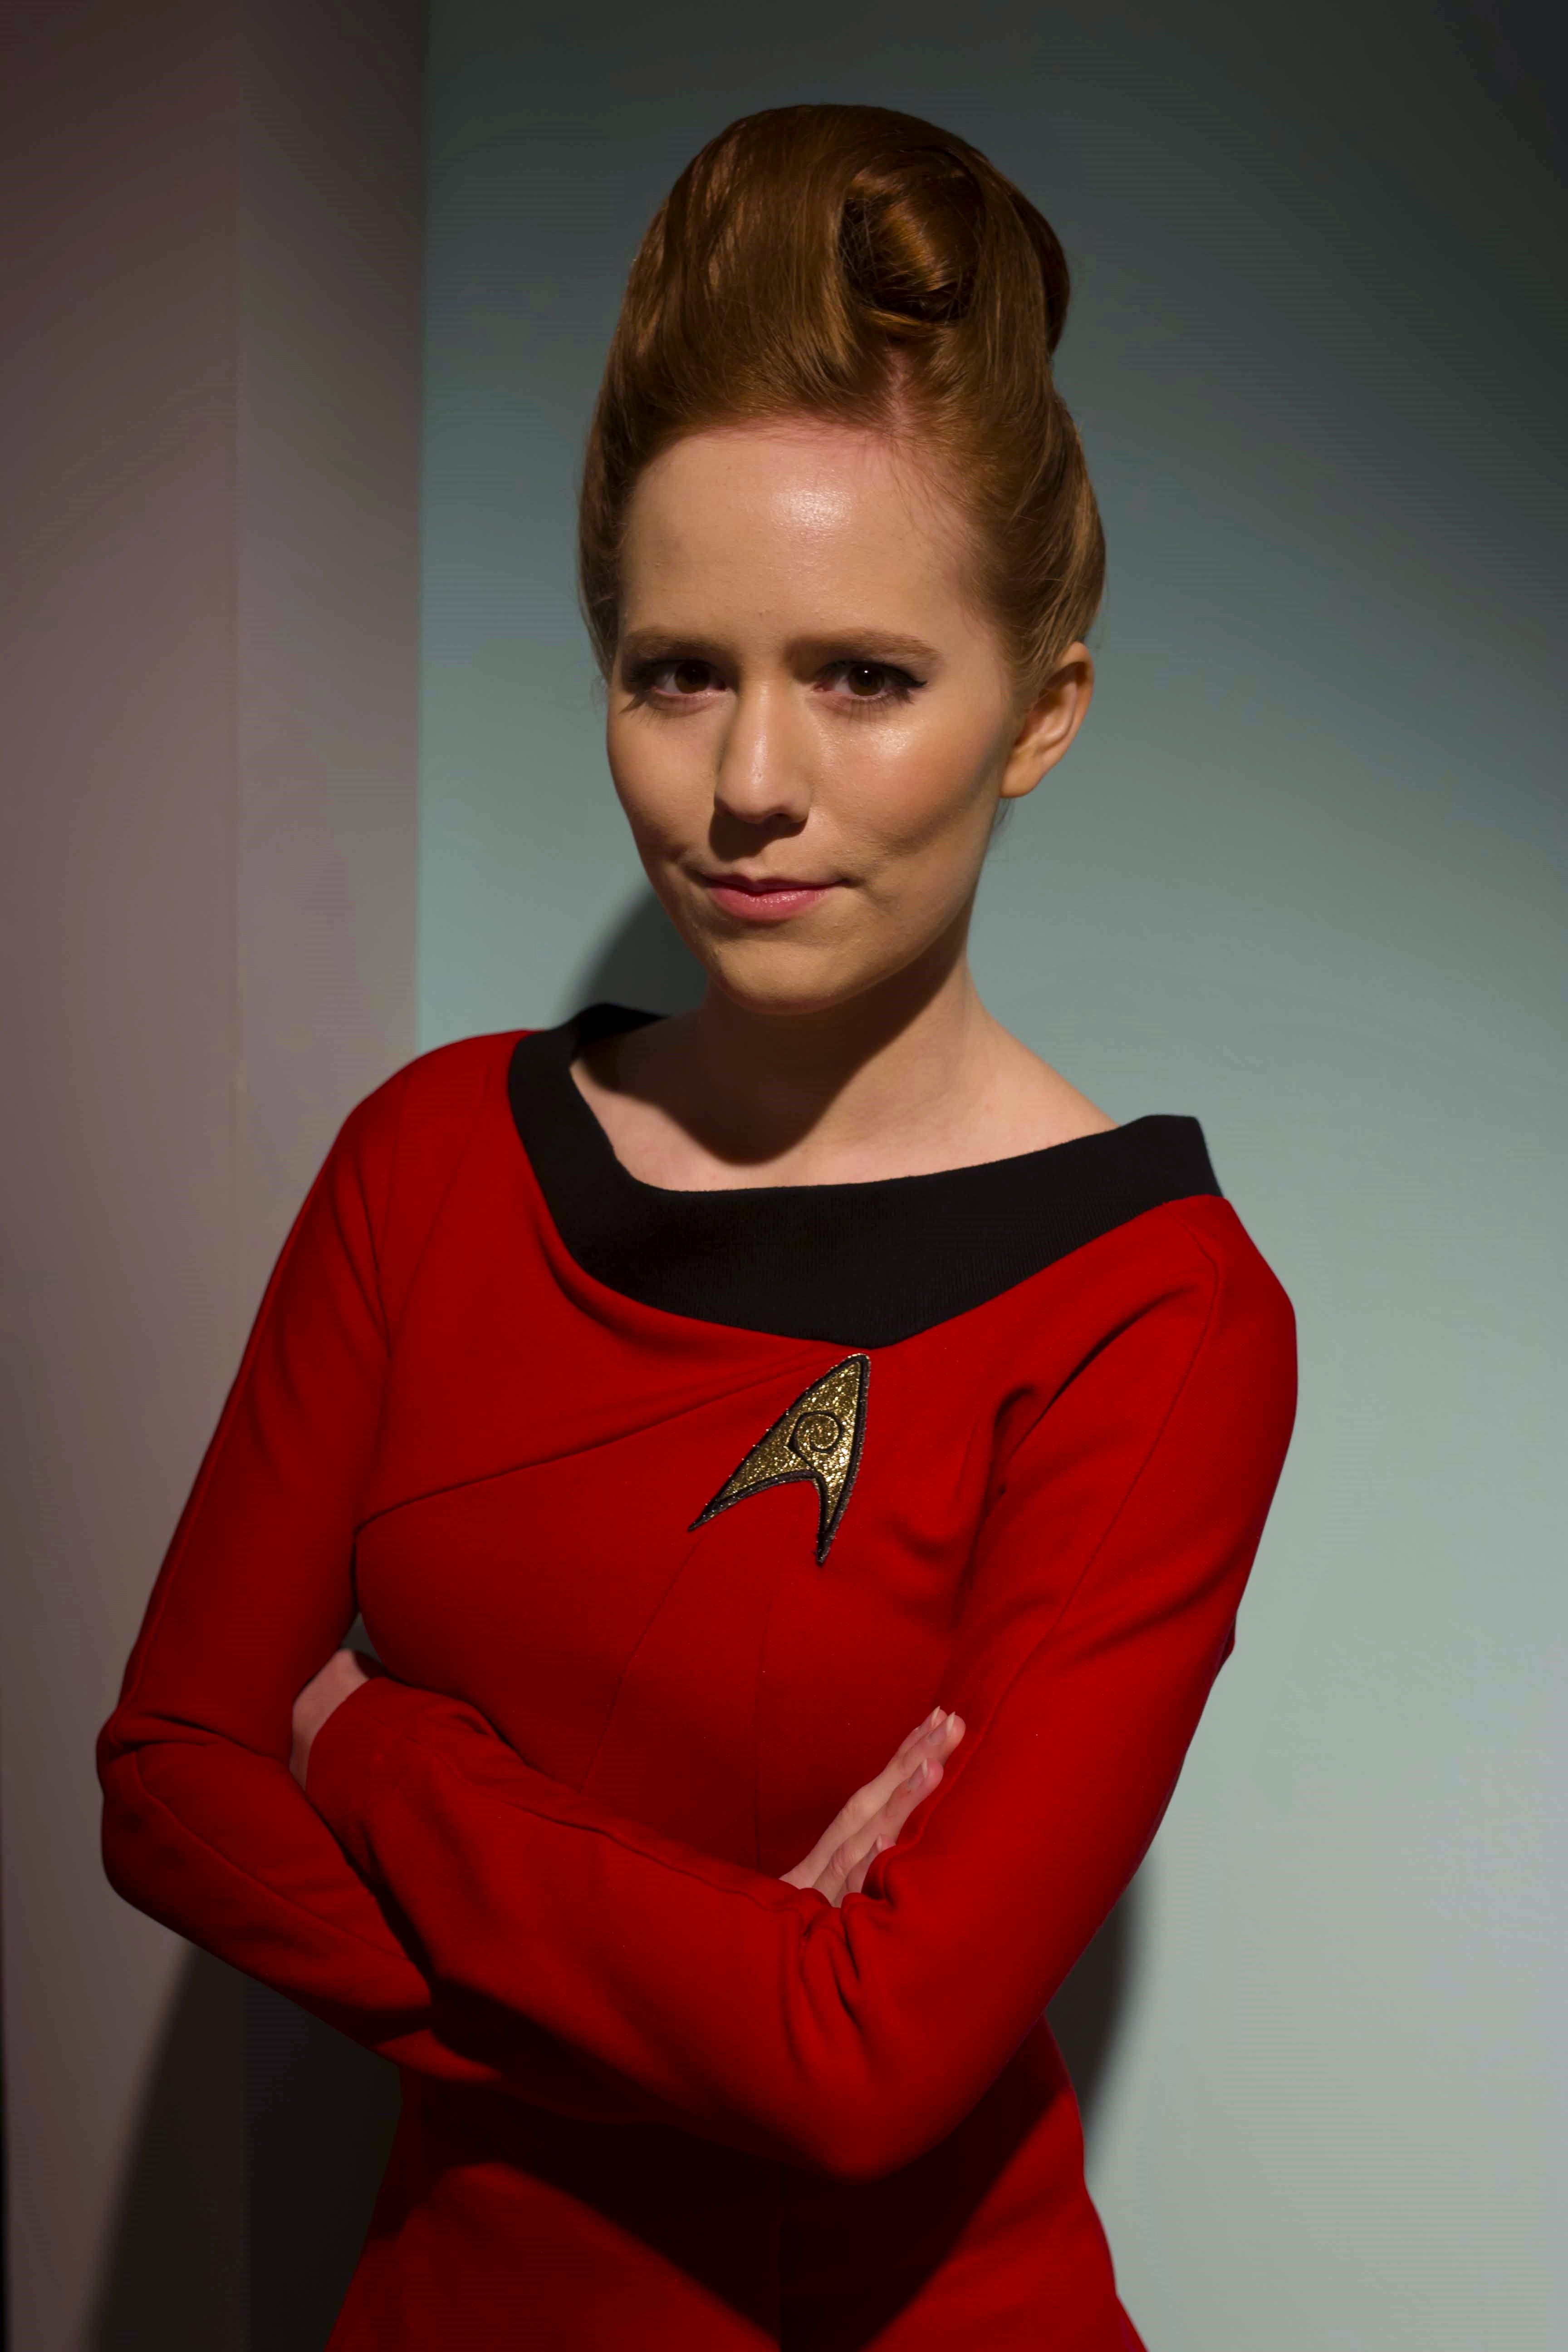 Abigail as the Yeoman on Star Trek Continues episode 4 